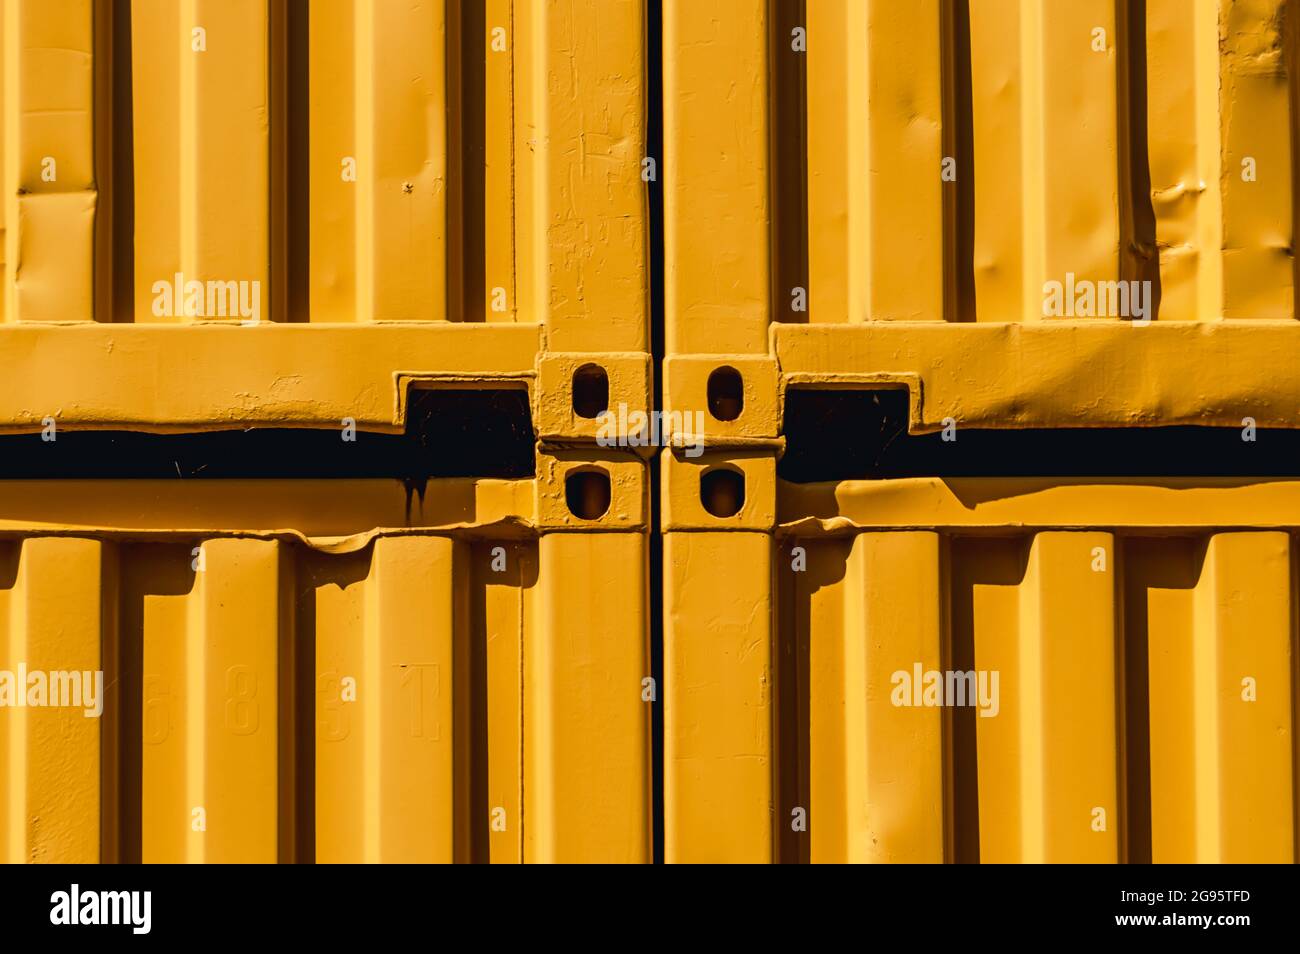 Abstract image of stacked yellow shipping containers in the sunlight Stock Photo